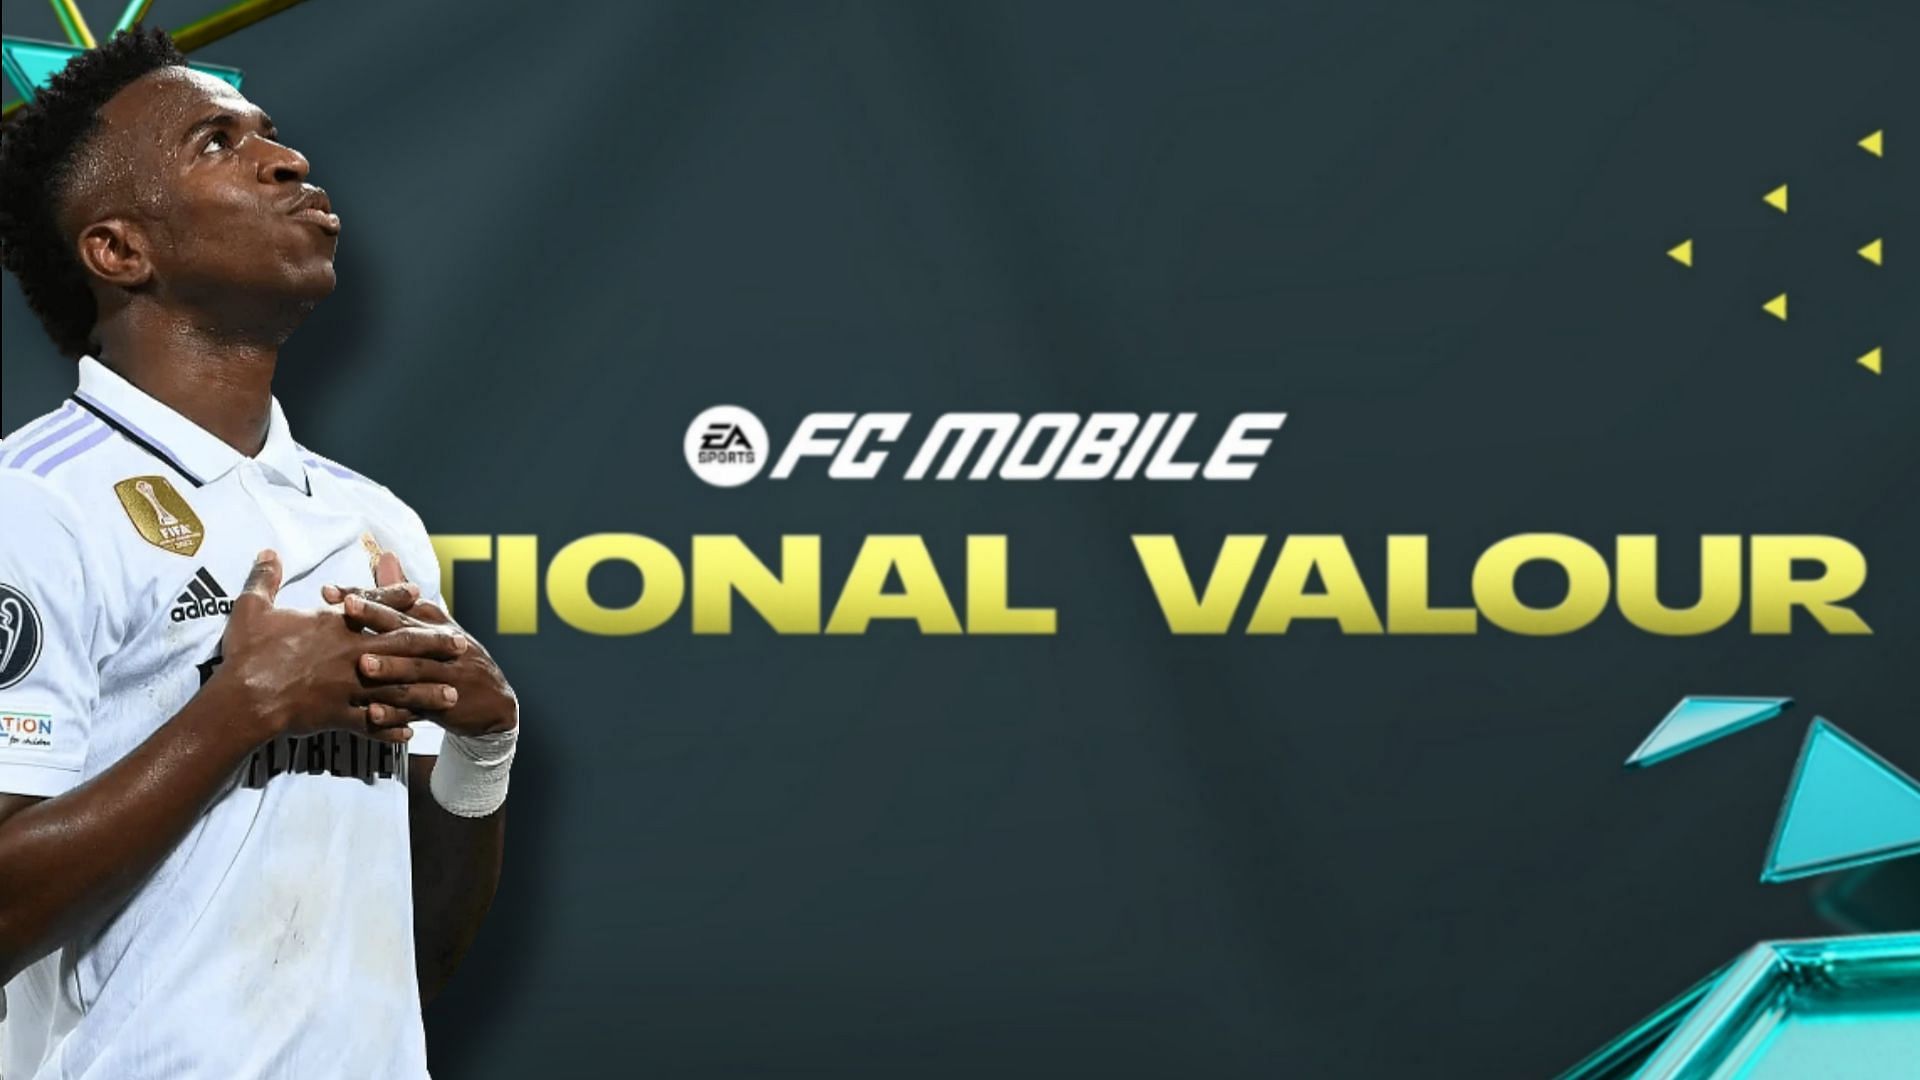 FC Mobile National Valour Pass offers great rewards (Image via EA Sports) 